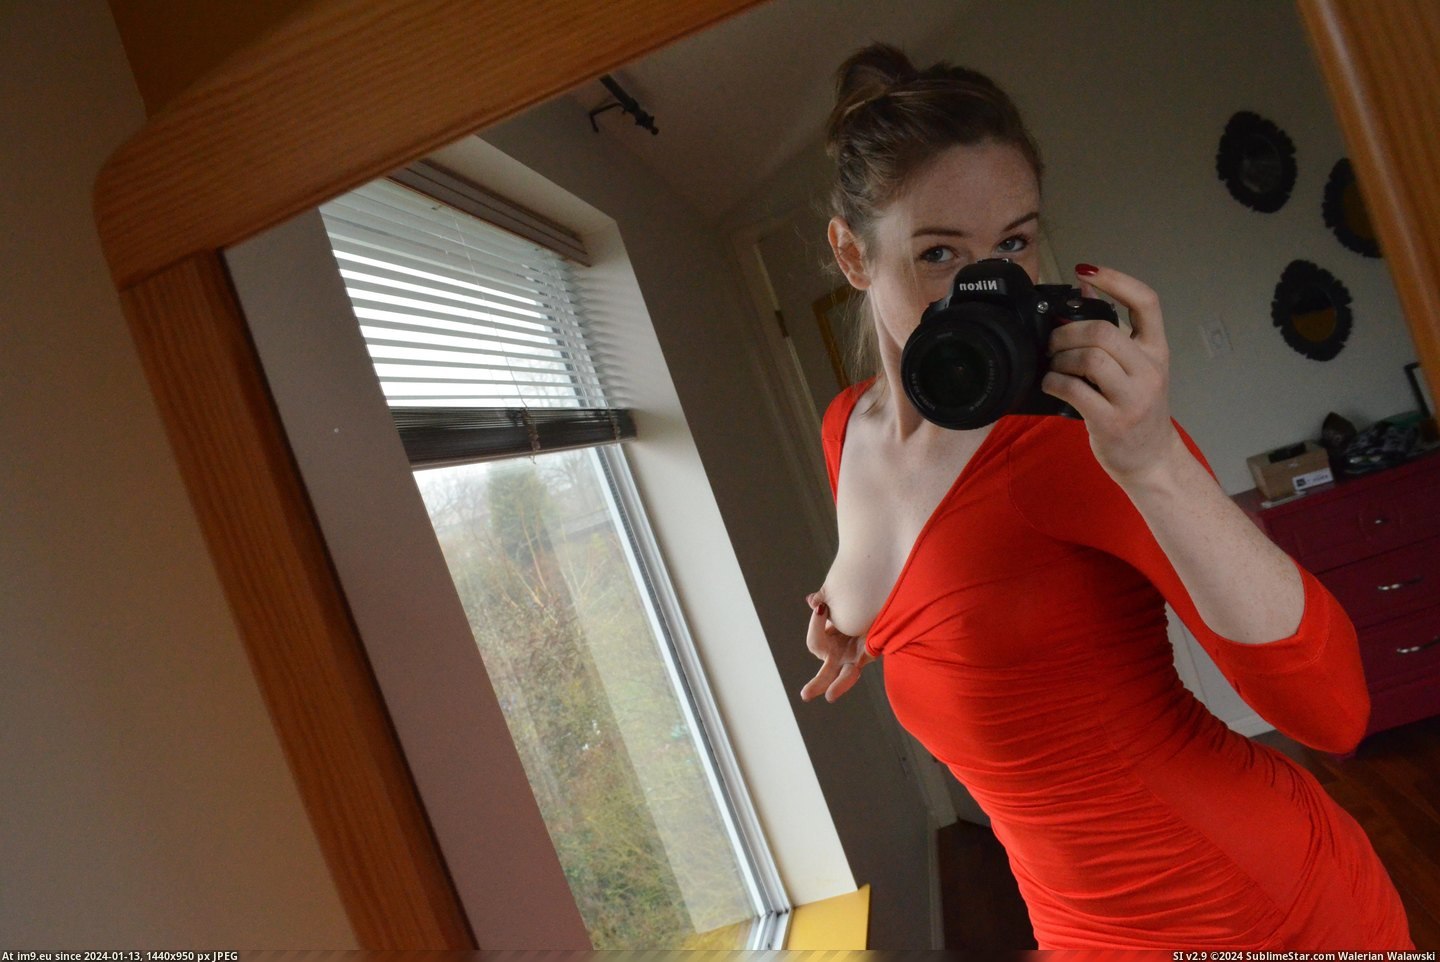 #Tight #Dress #Xmas #Too #Party [Gonewild] Is this dress too tight [f]or an Xmas party? 1 Pic. (Obraz z album My r/GONEWILD favs))